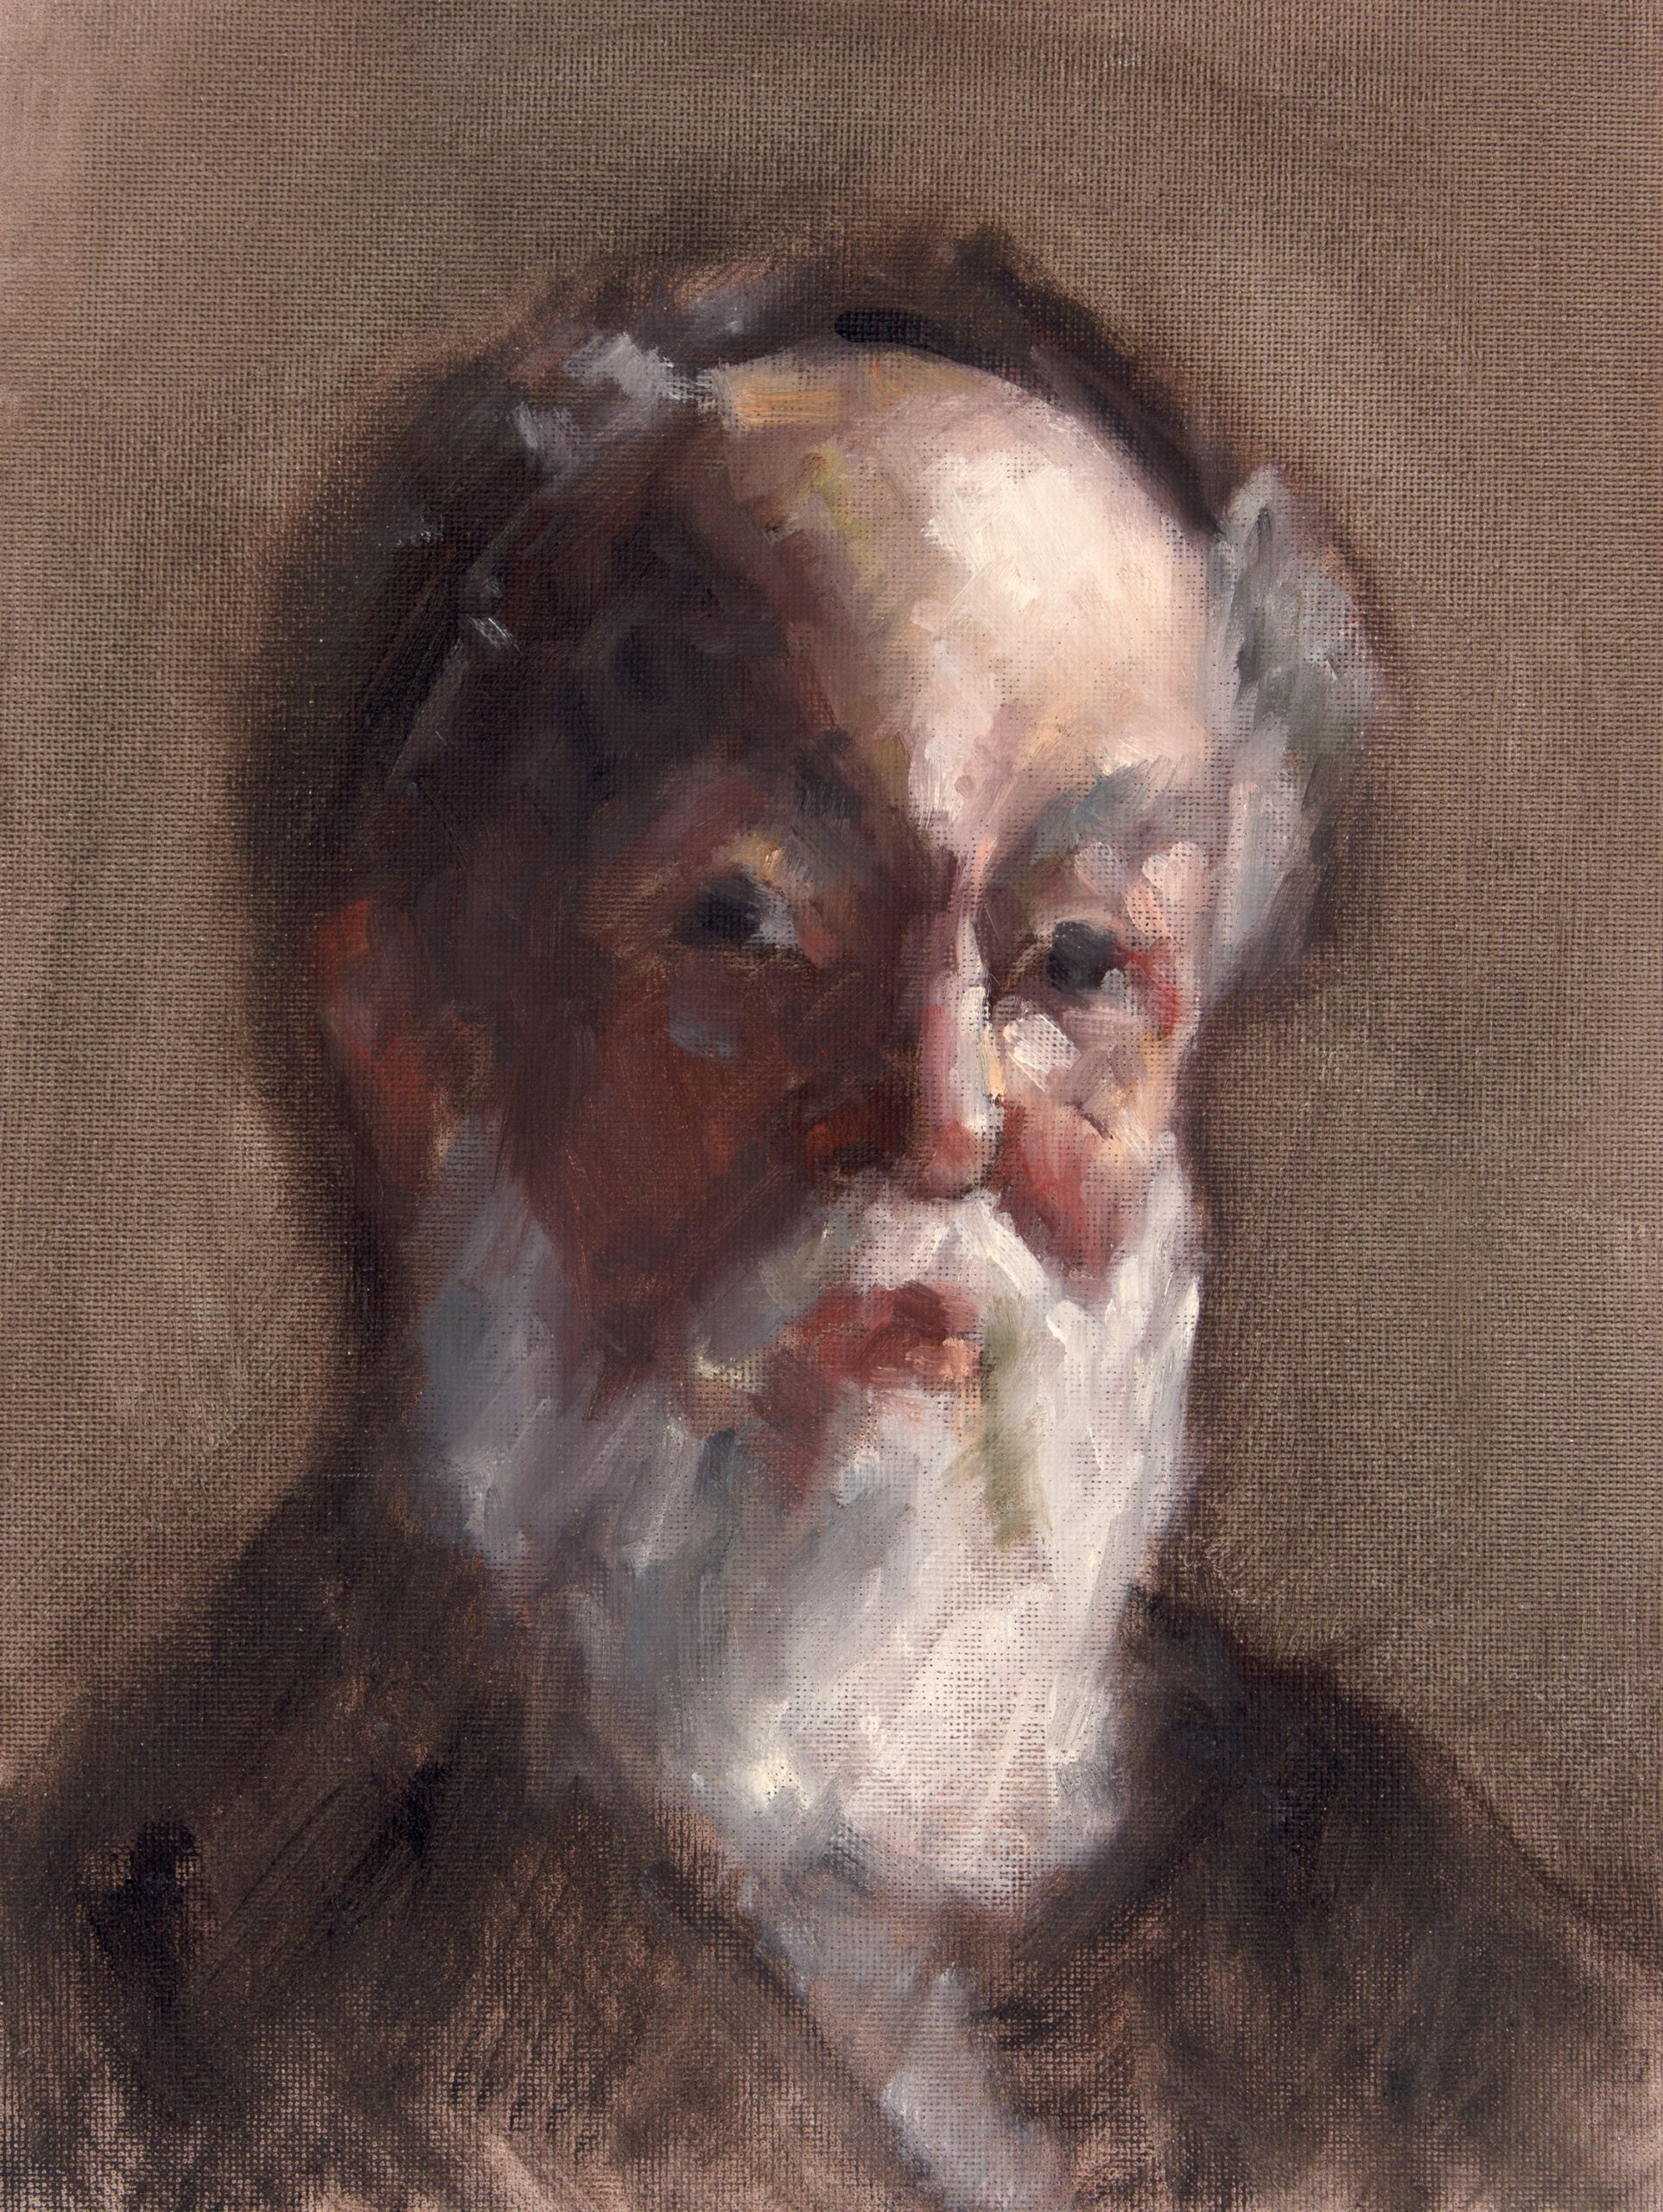 Painting of an old man with a white beard and dark suit coat